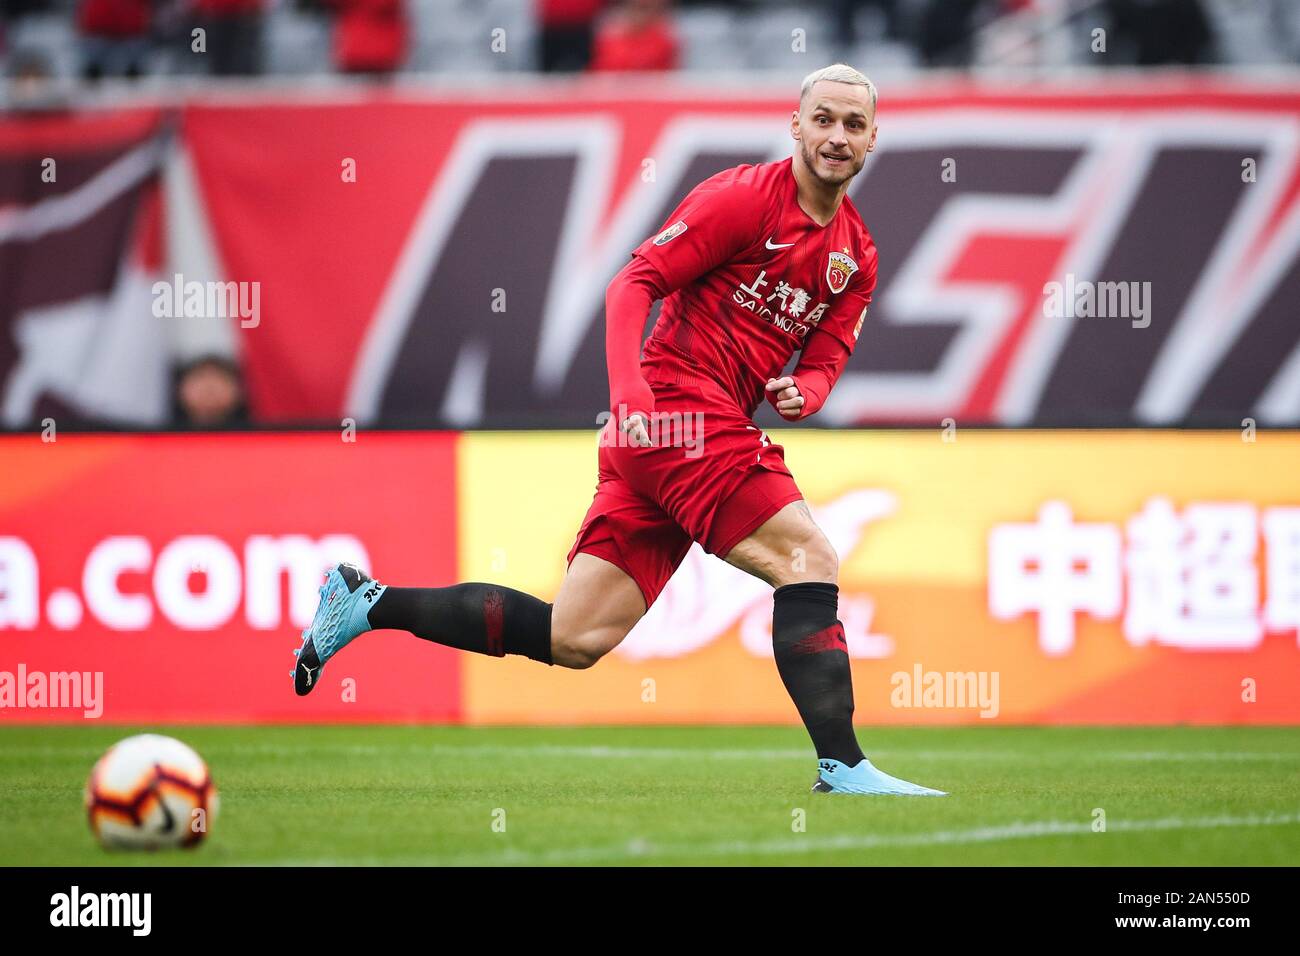 Austrian Football Player Marko Arnautovic Of Shanghai Sipg F C Attempts To Stop The Ball During The 30th Round Match Of Chinese Football Association Stock Photo Alamy